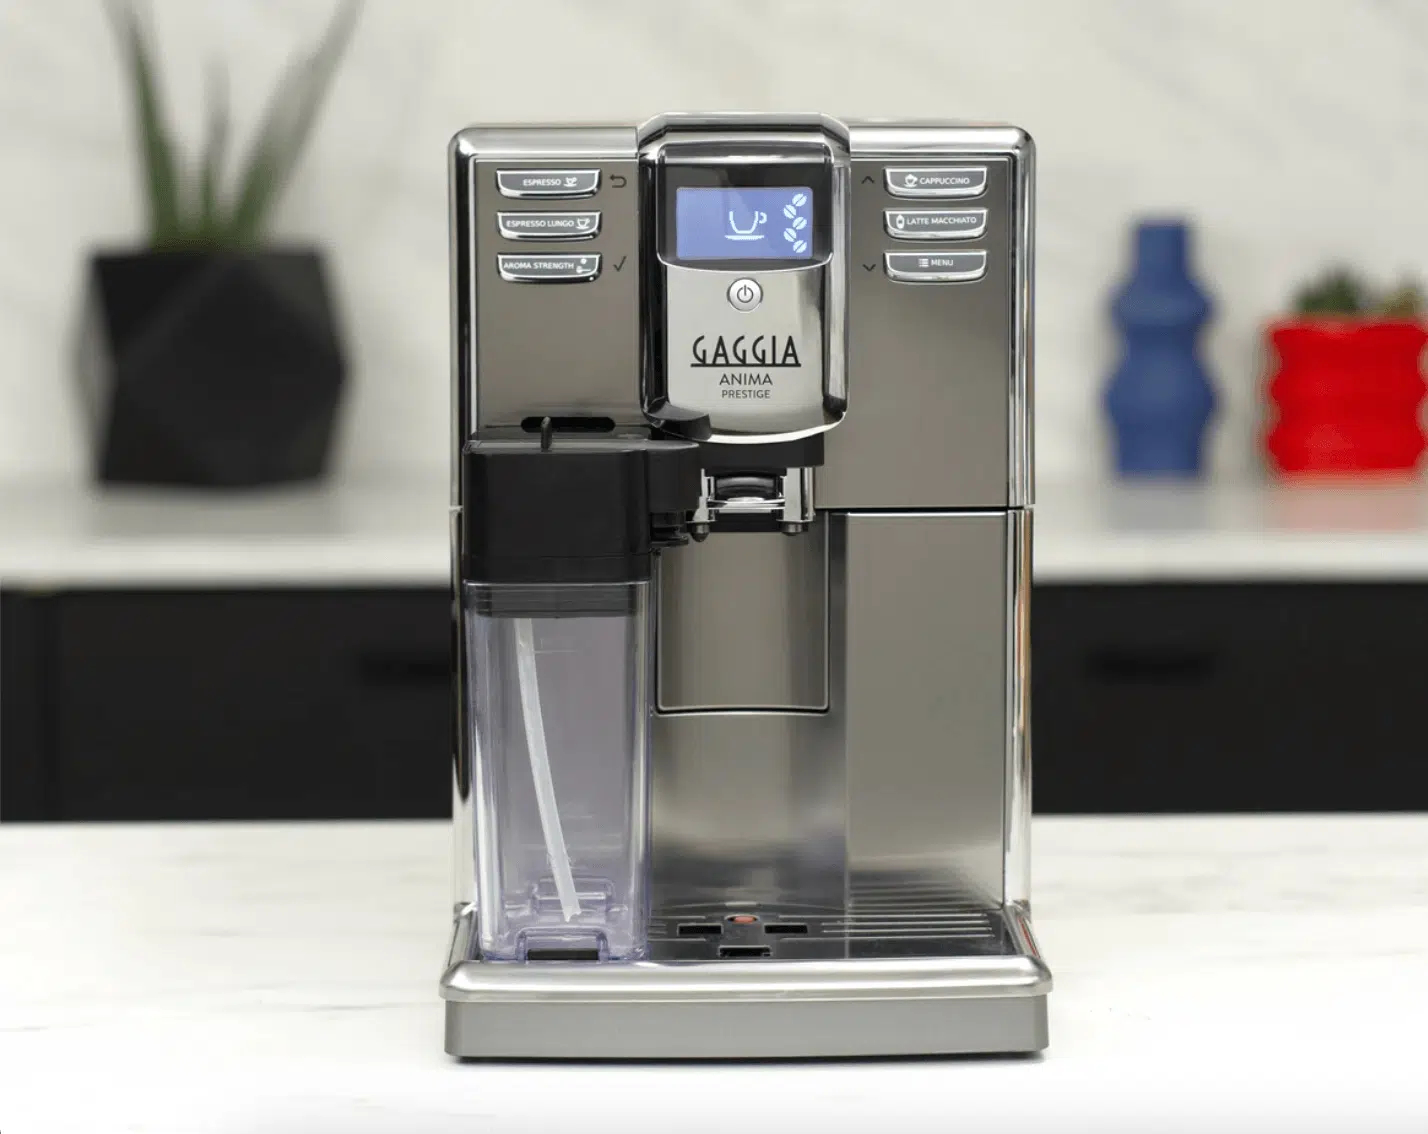 What Are The Best Automatic Espresso Machines For Home Use?